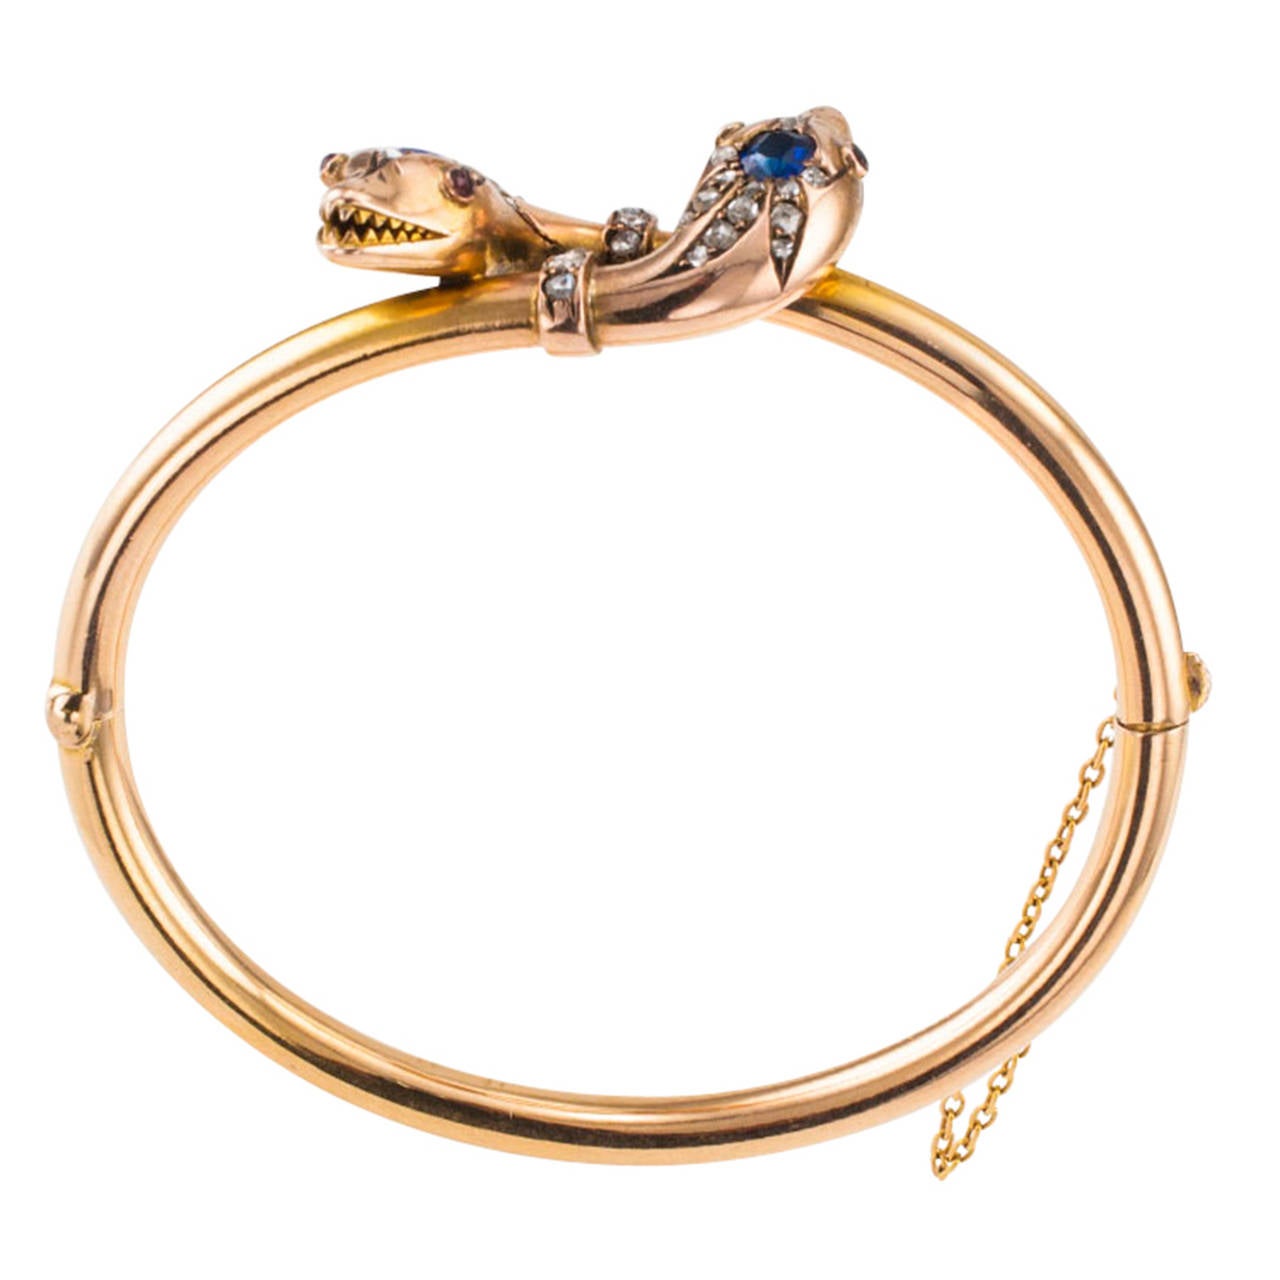 Bejeweled 15 Karat Gold Victorian Double Snake Bangle

Sensuous and beguiling snakes, sleek and mystifying, this heirloom antique bangle is free of damage or defects.  Decorated at the top with a pair of seductive snake heads, each crowned with a